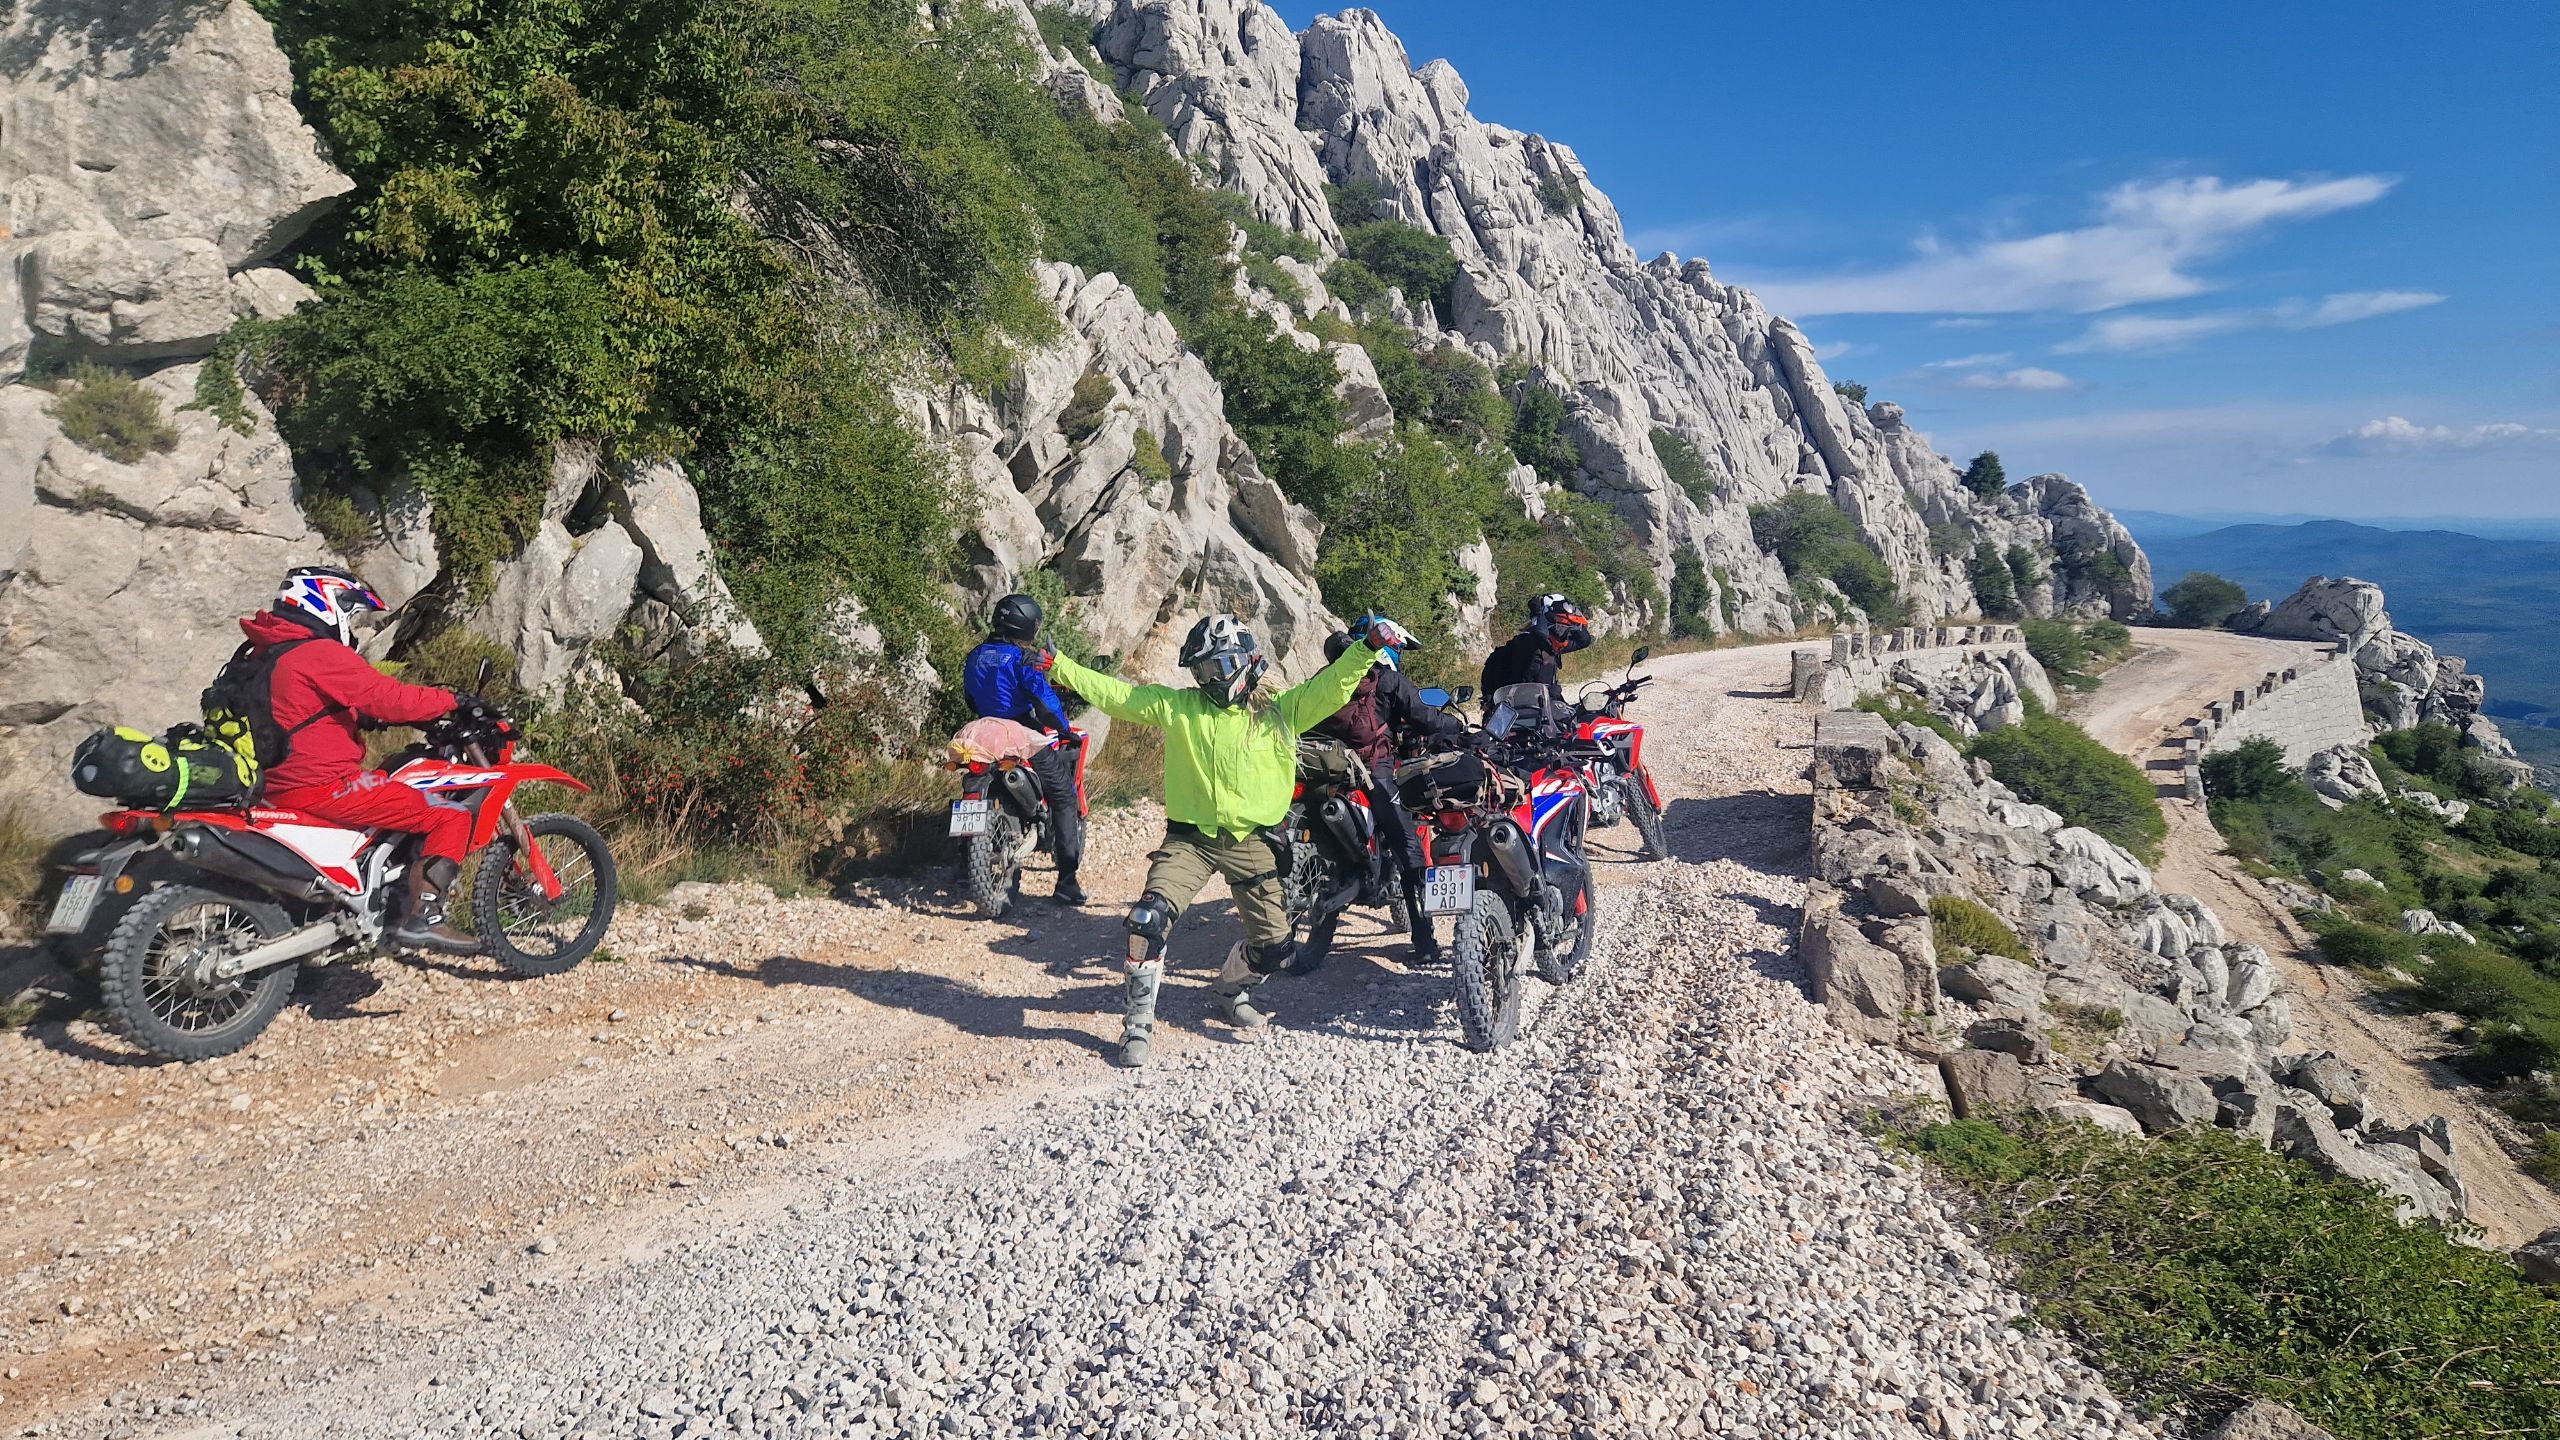 Funmoto ADVentures sightseeing 4 day only womens motorcycle tour in Croatia fun on bikes